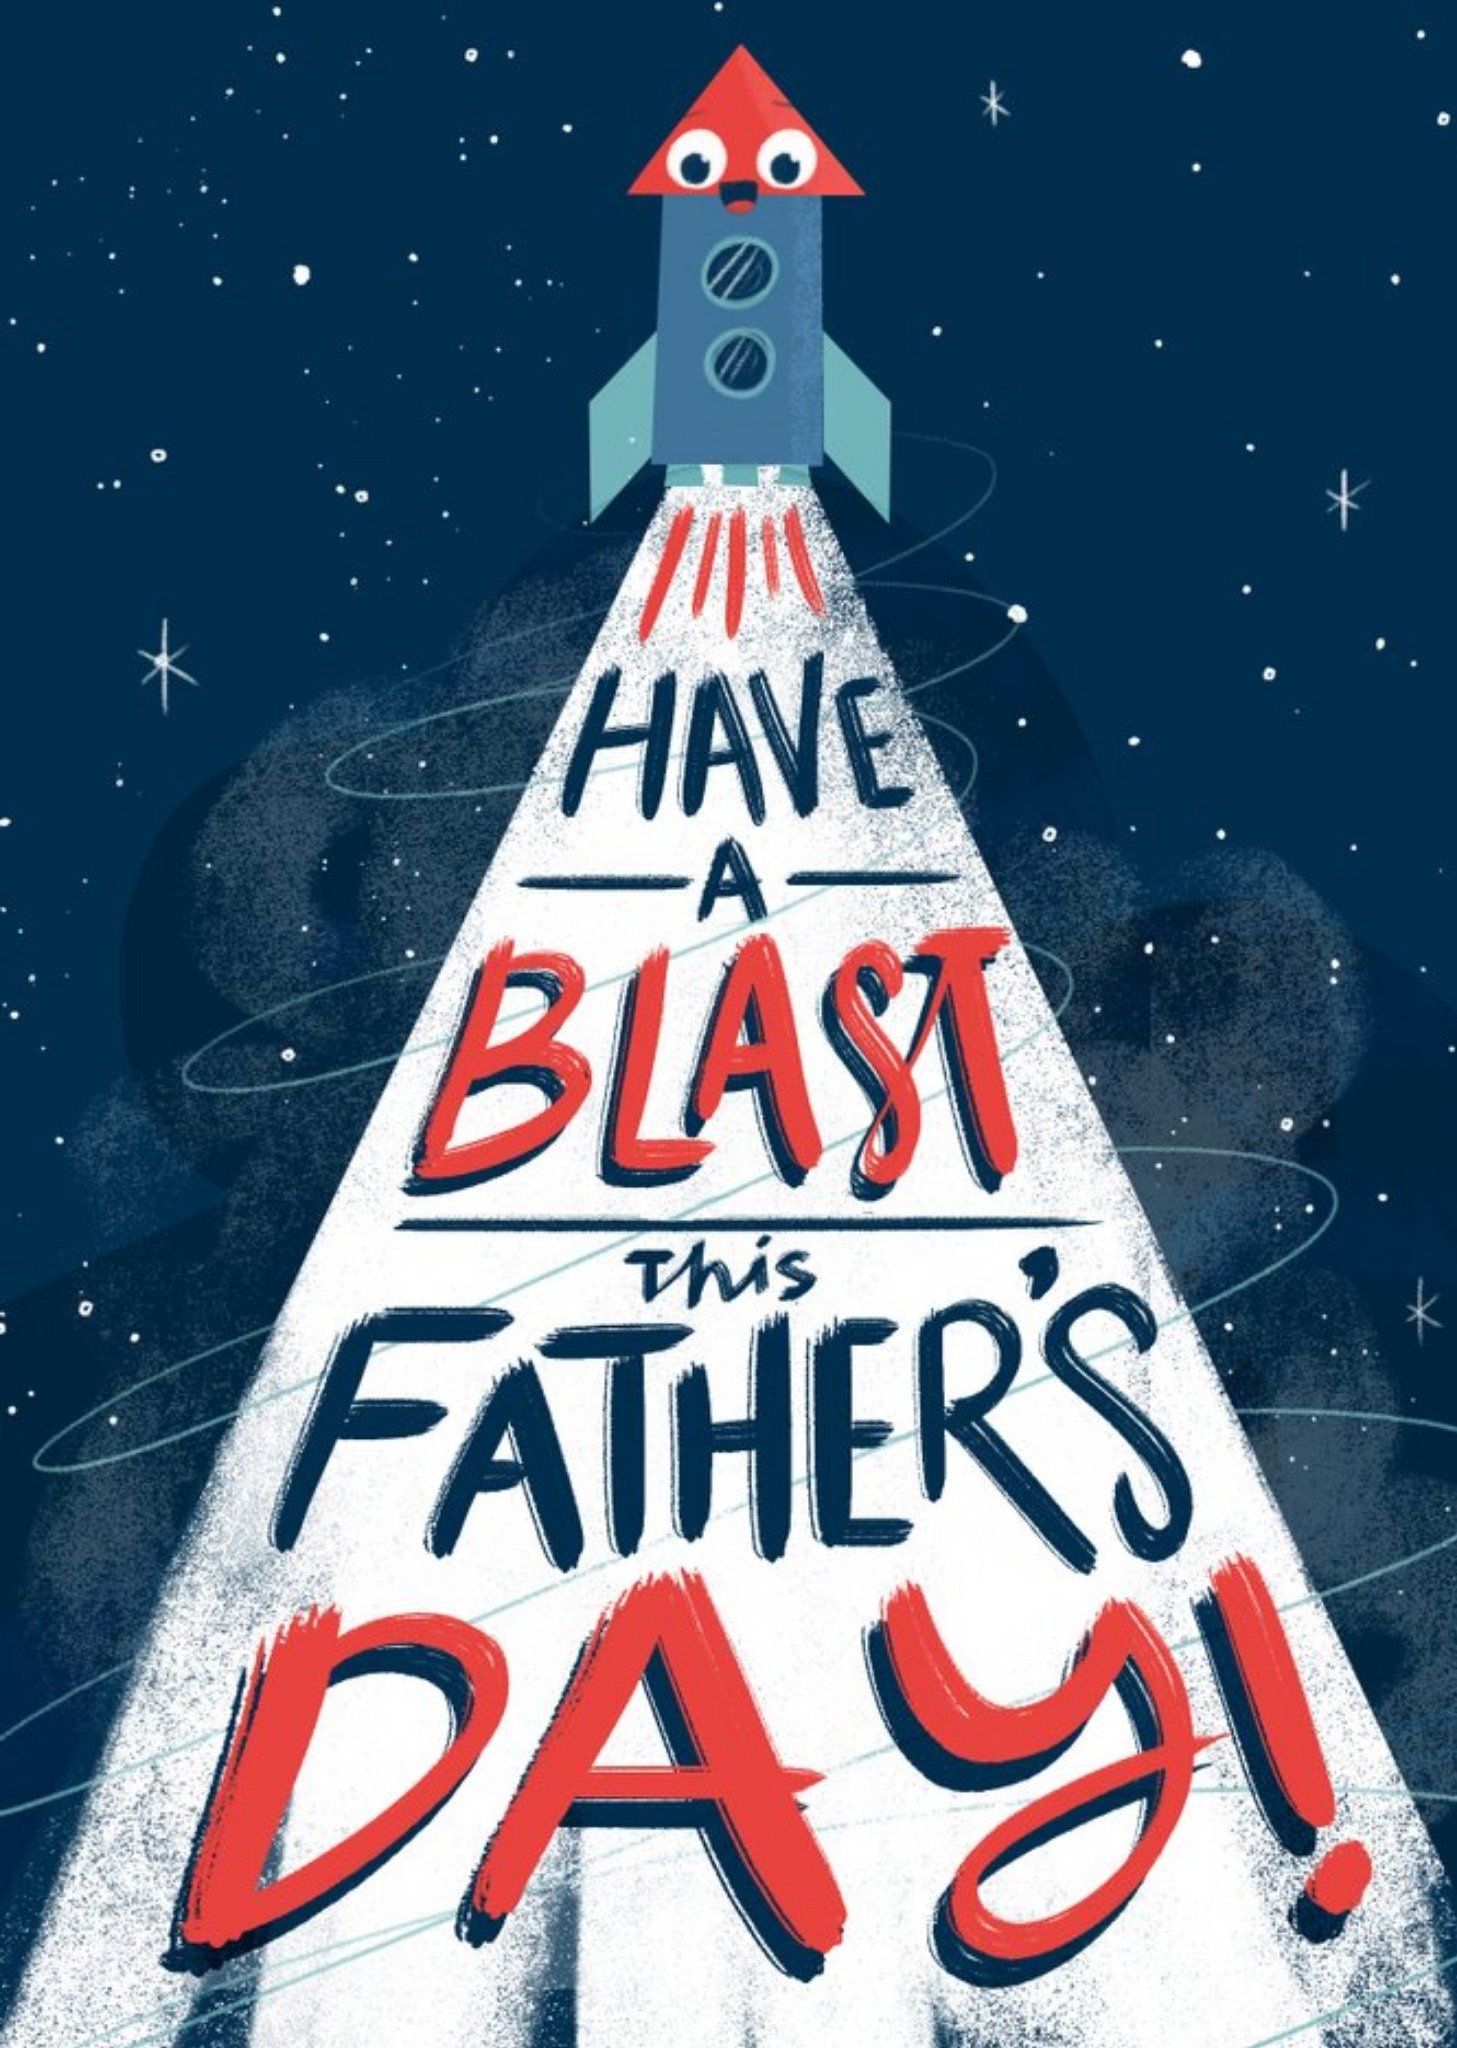 Moonpig Rocket Illustration Have A Blast This Father's Day Card Ecard